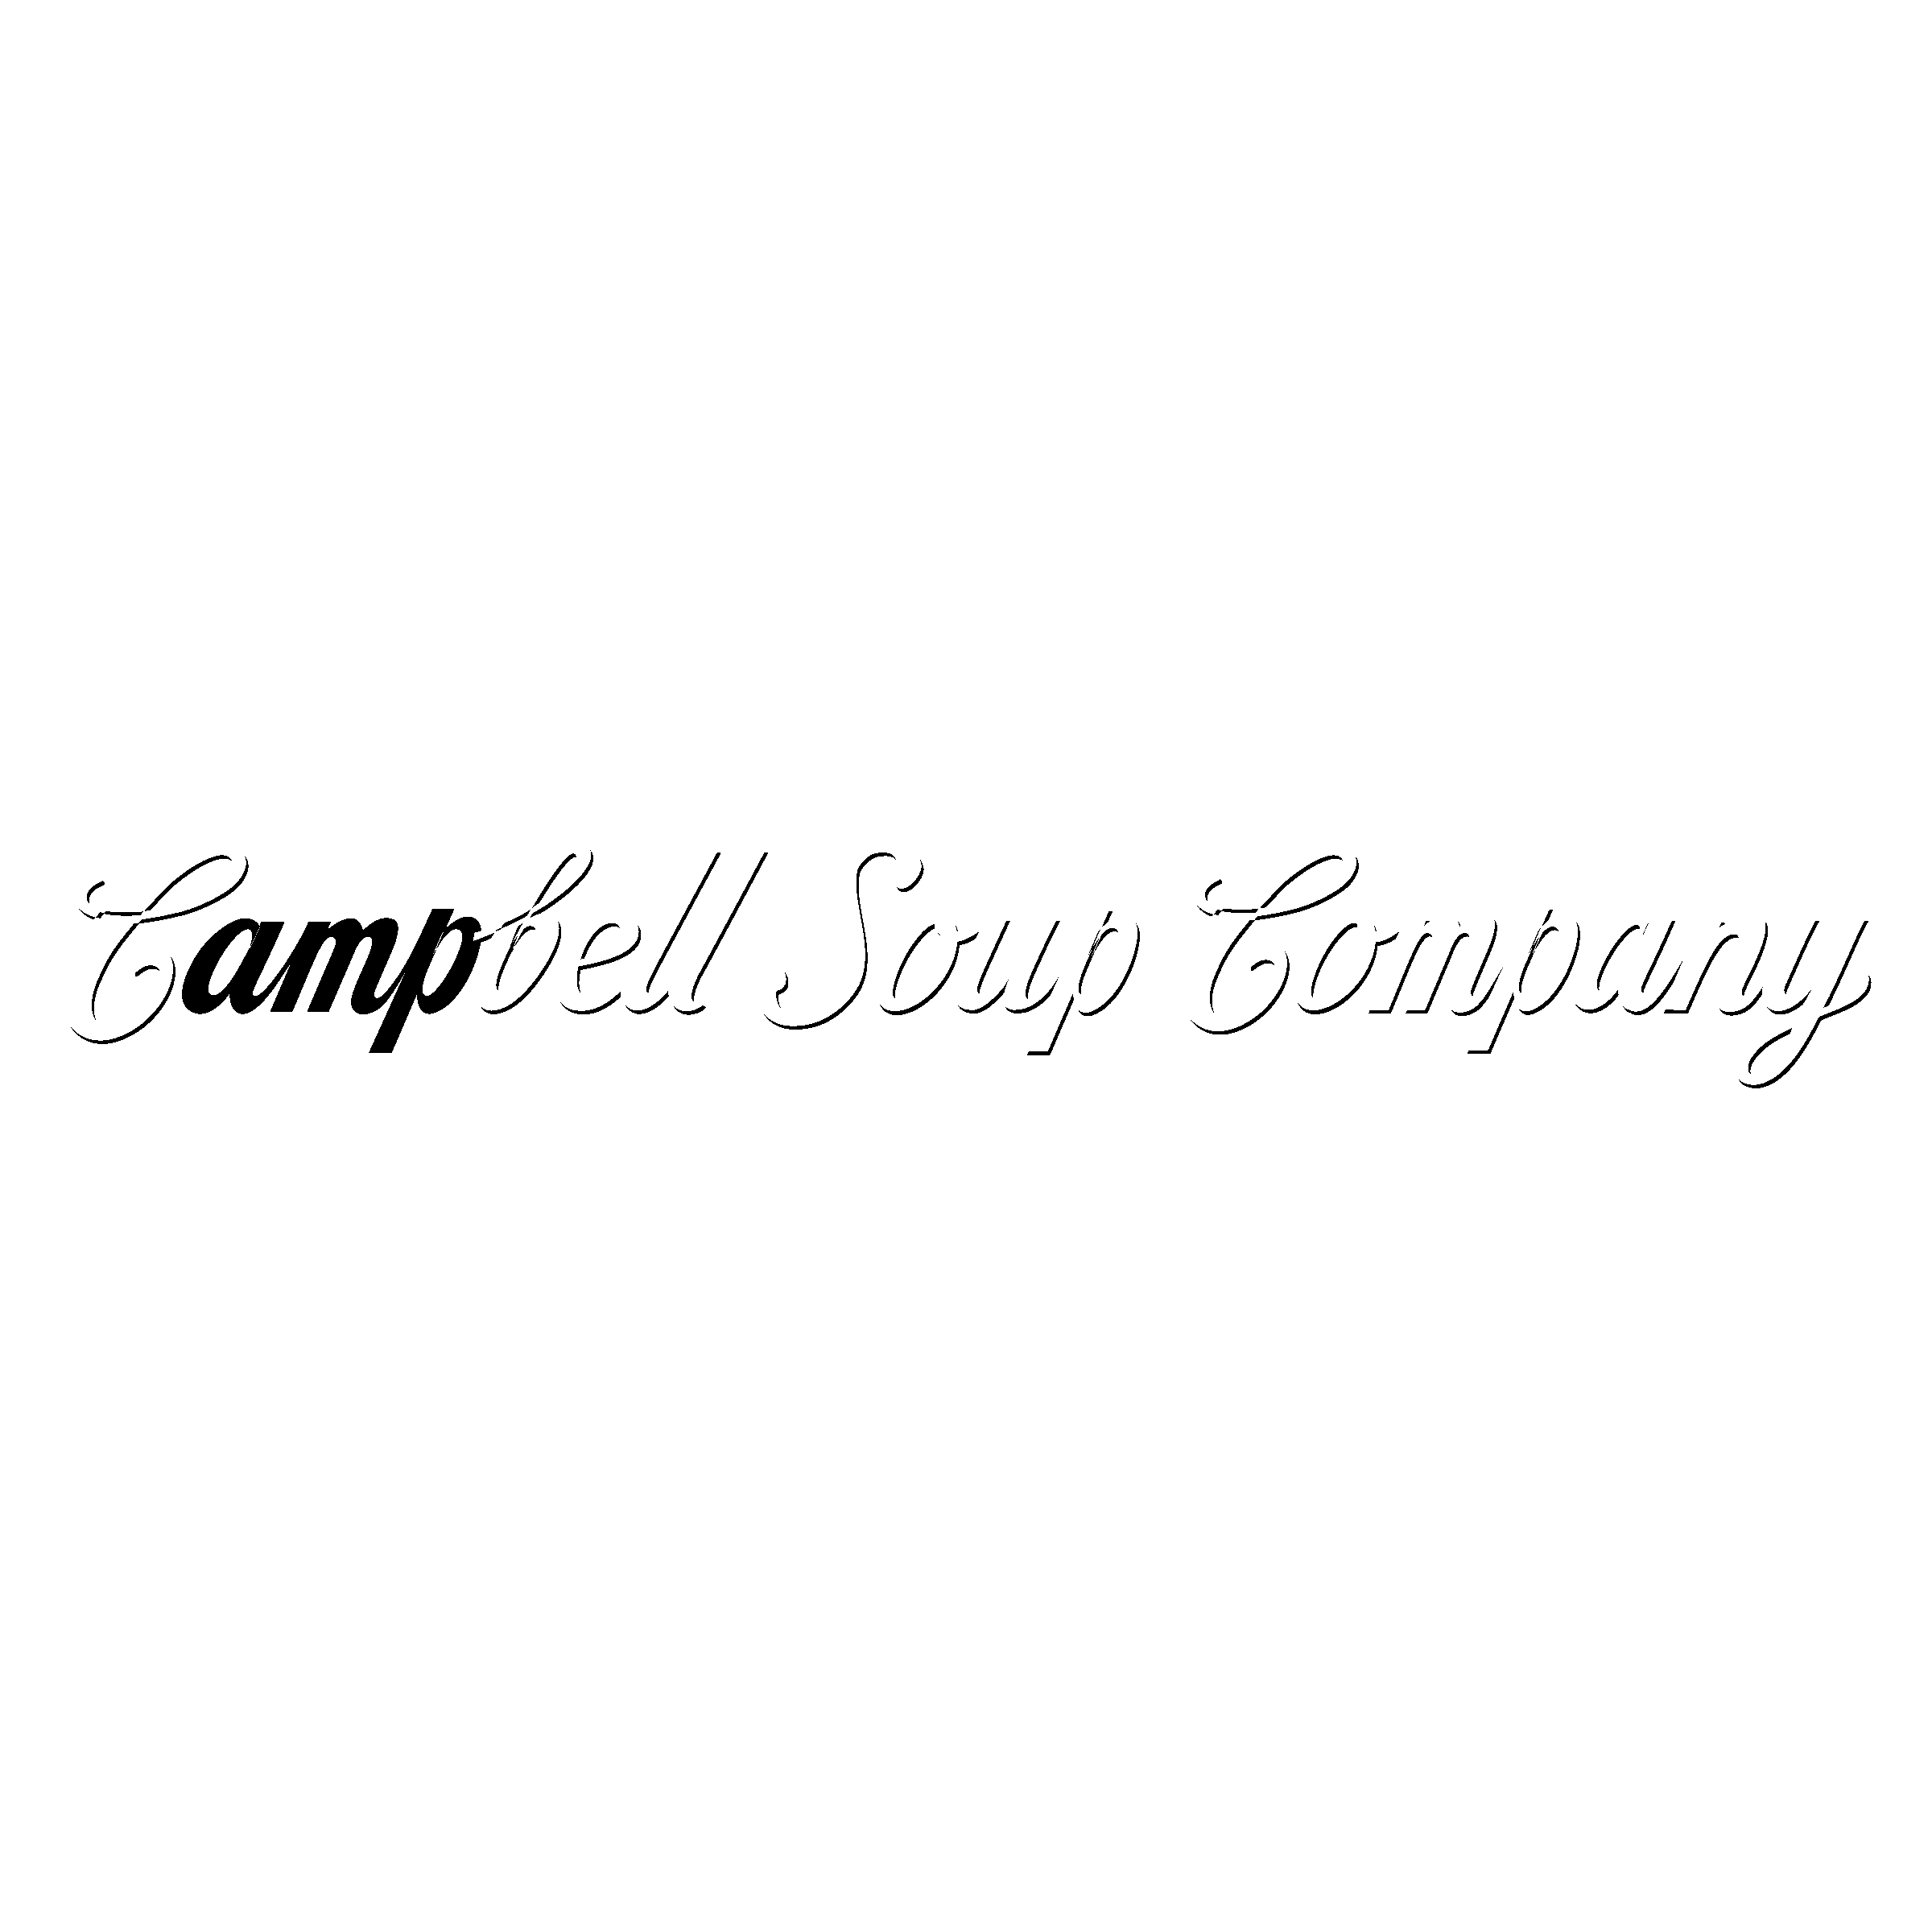 Campbell's Soup Company Logo - Campbell Soup Company Logo PNG Transparent & SVG Vector - Freebie Supply